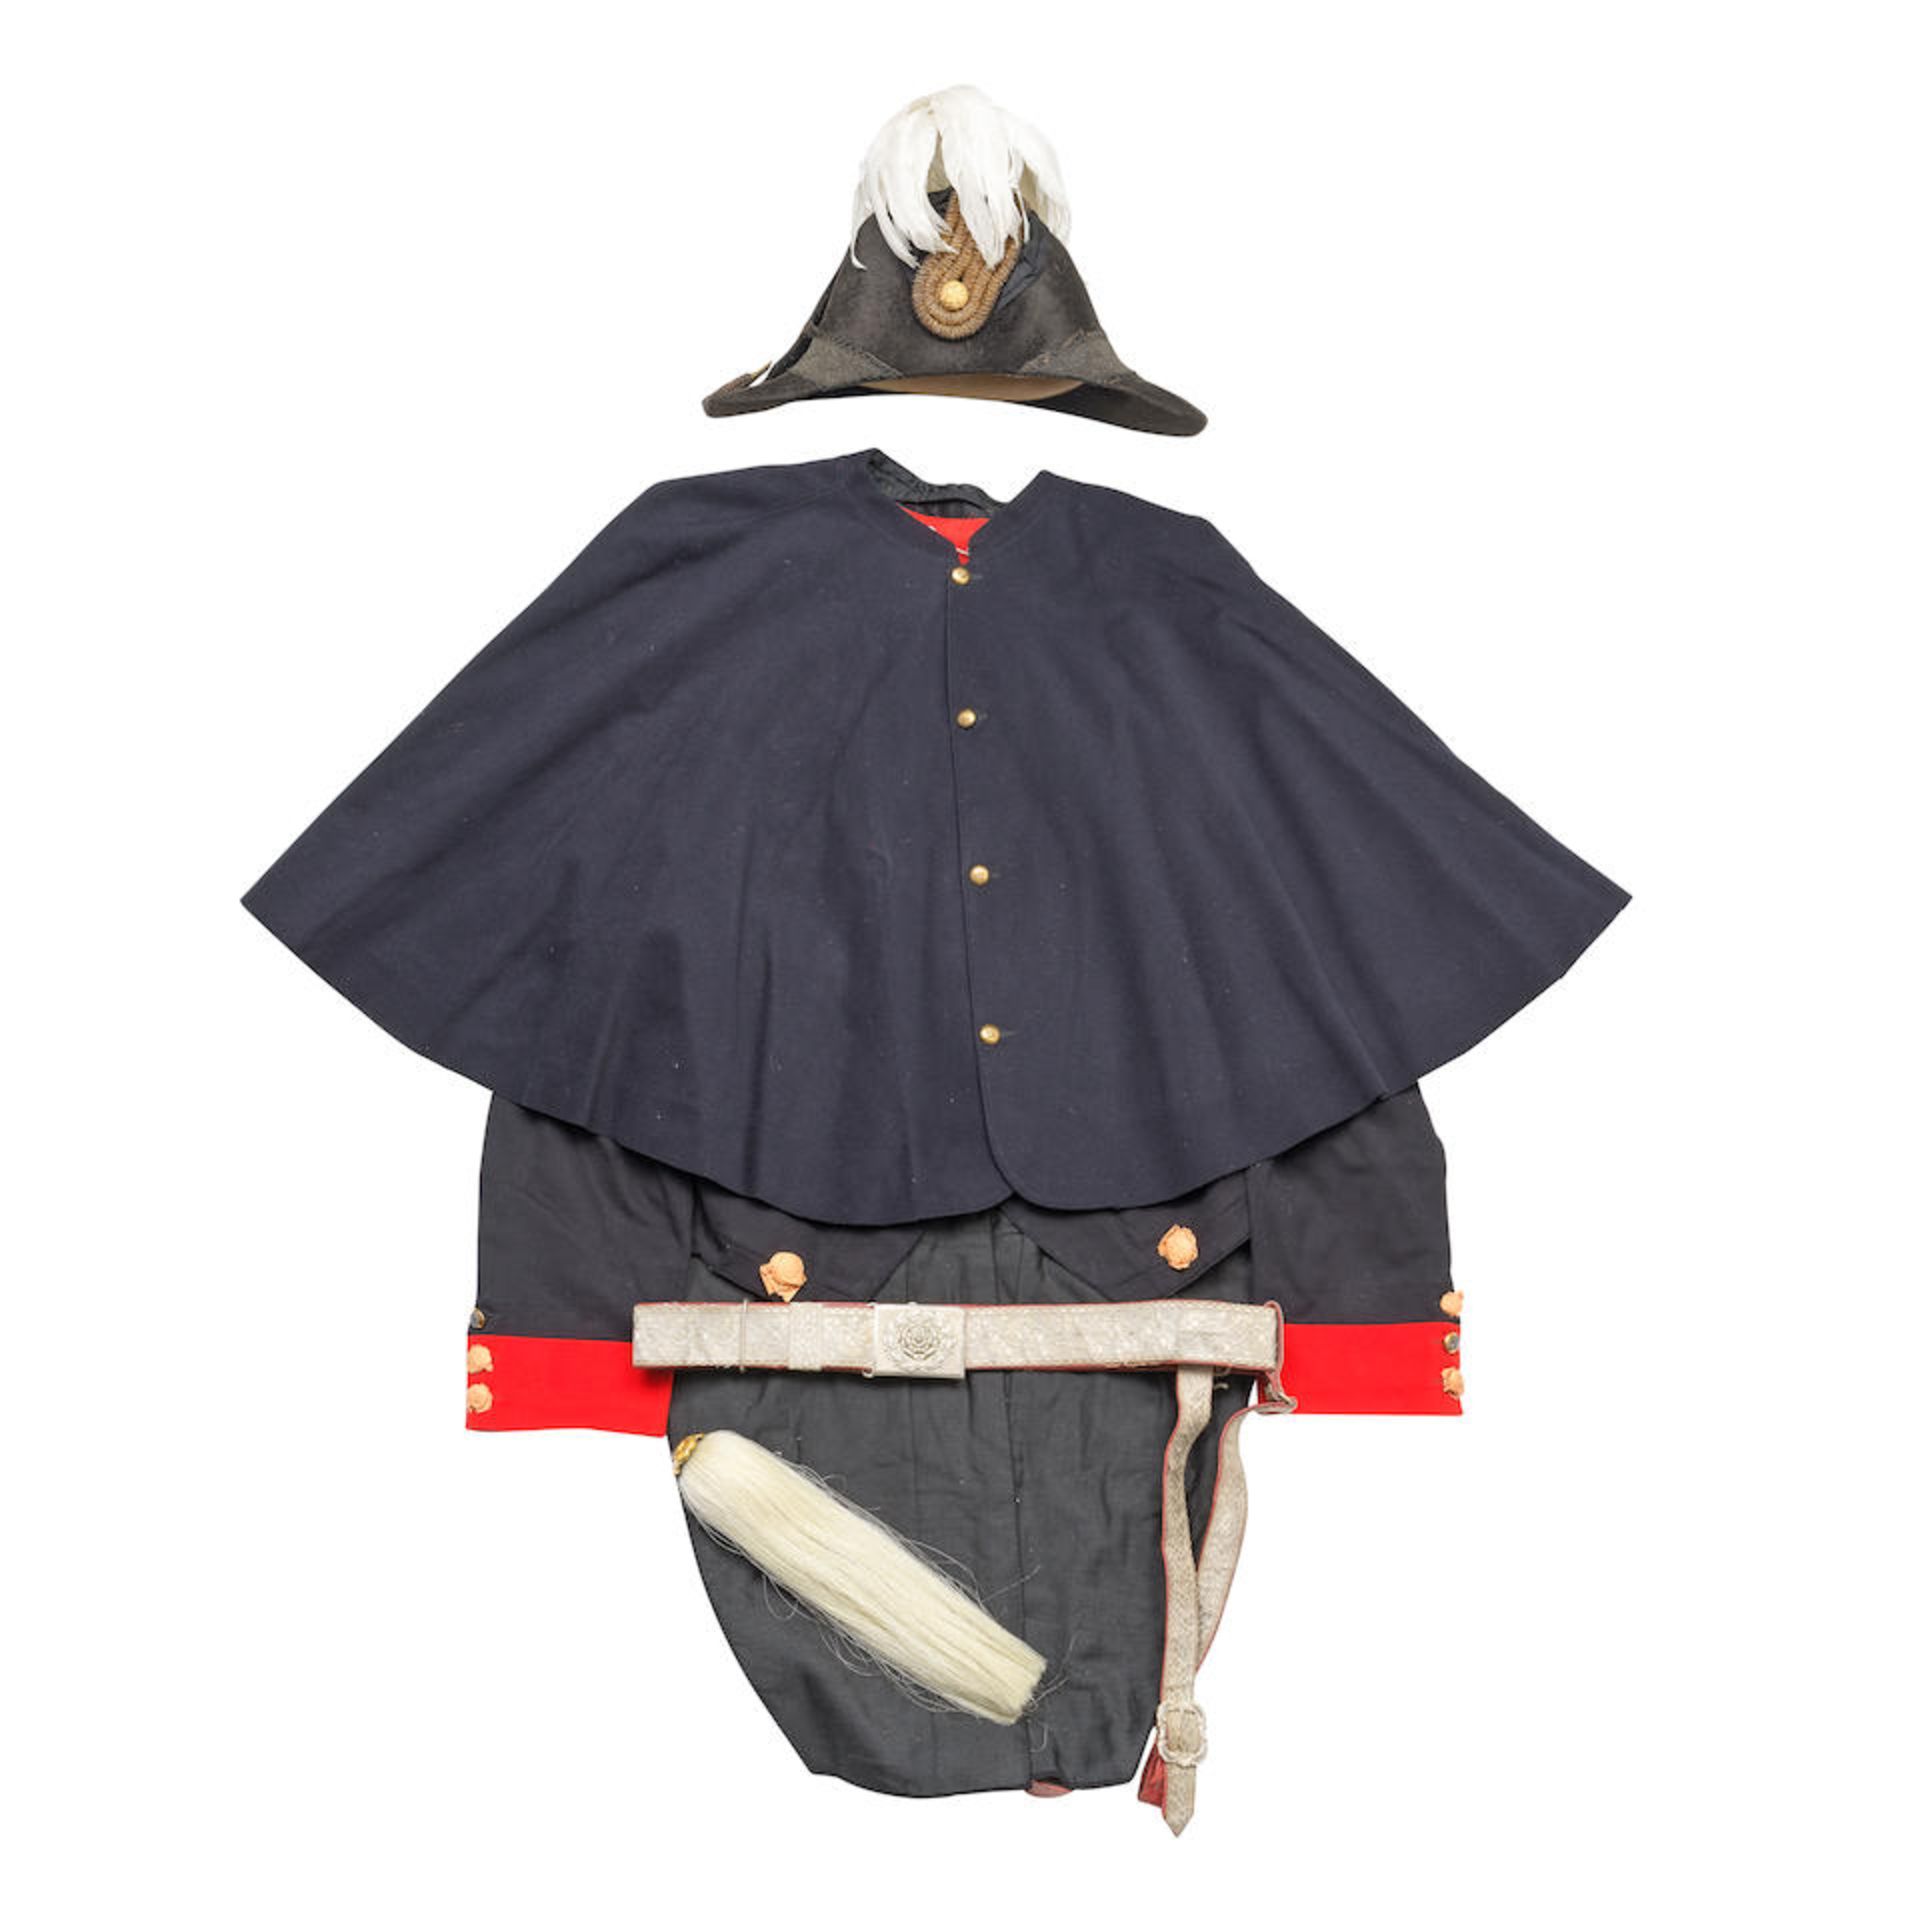 Various Items Of Uniform Relating To The Barons Monson, And Accessories Relating To The Duke Of ...